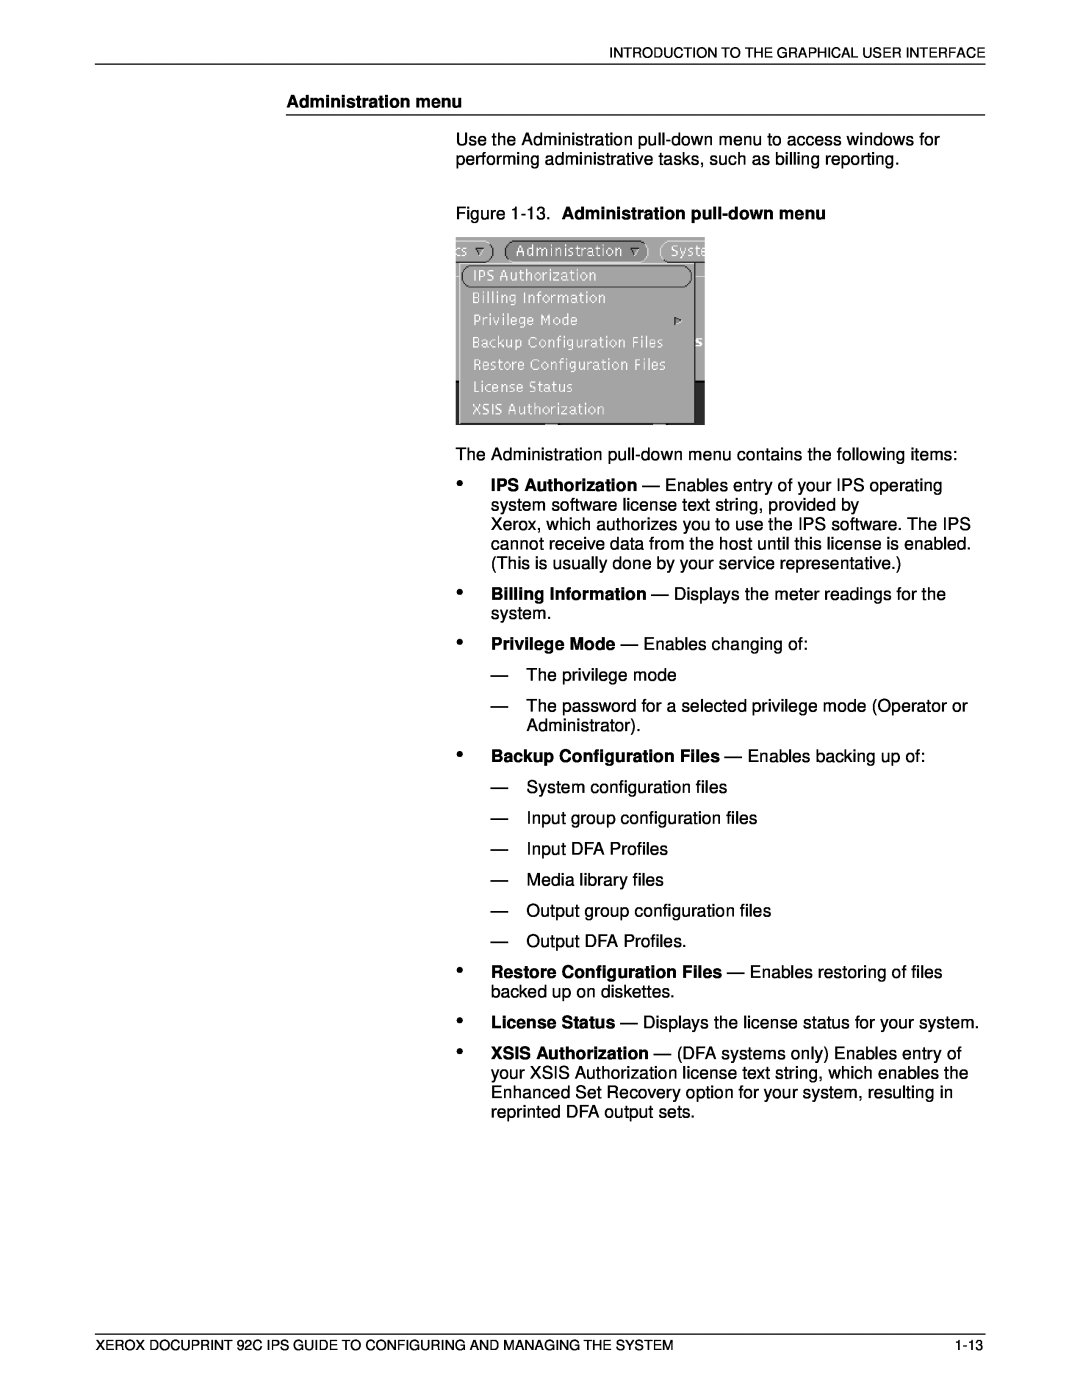 Xerox 92C IPS Administration menu, 13. Administration pull-down menu, Backup Configuration Files - Enables backing up of 